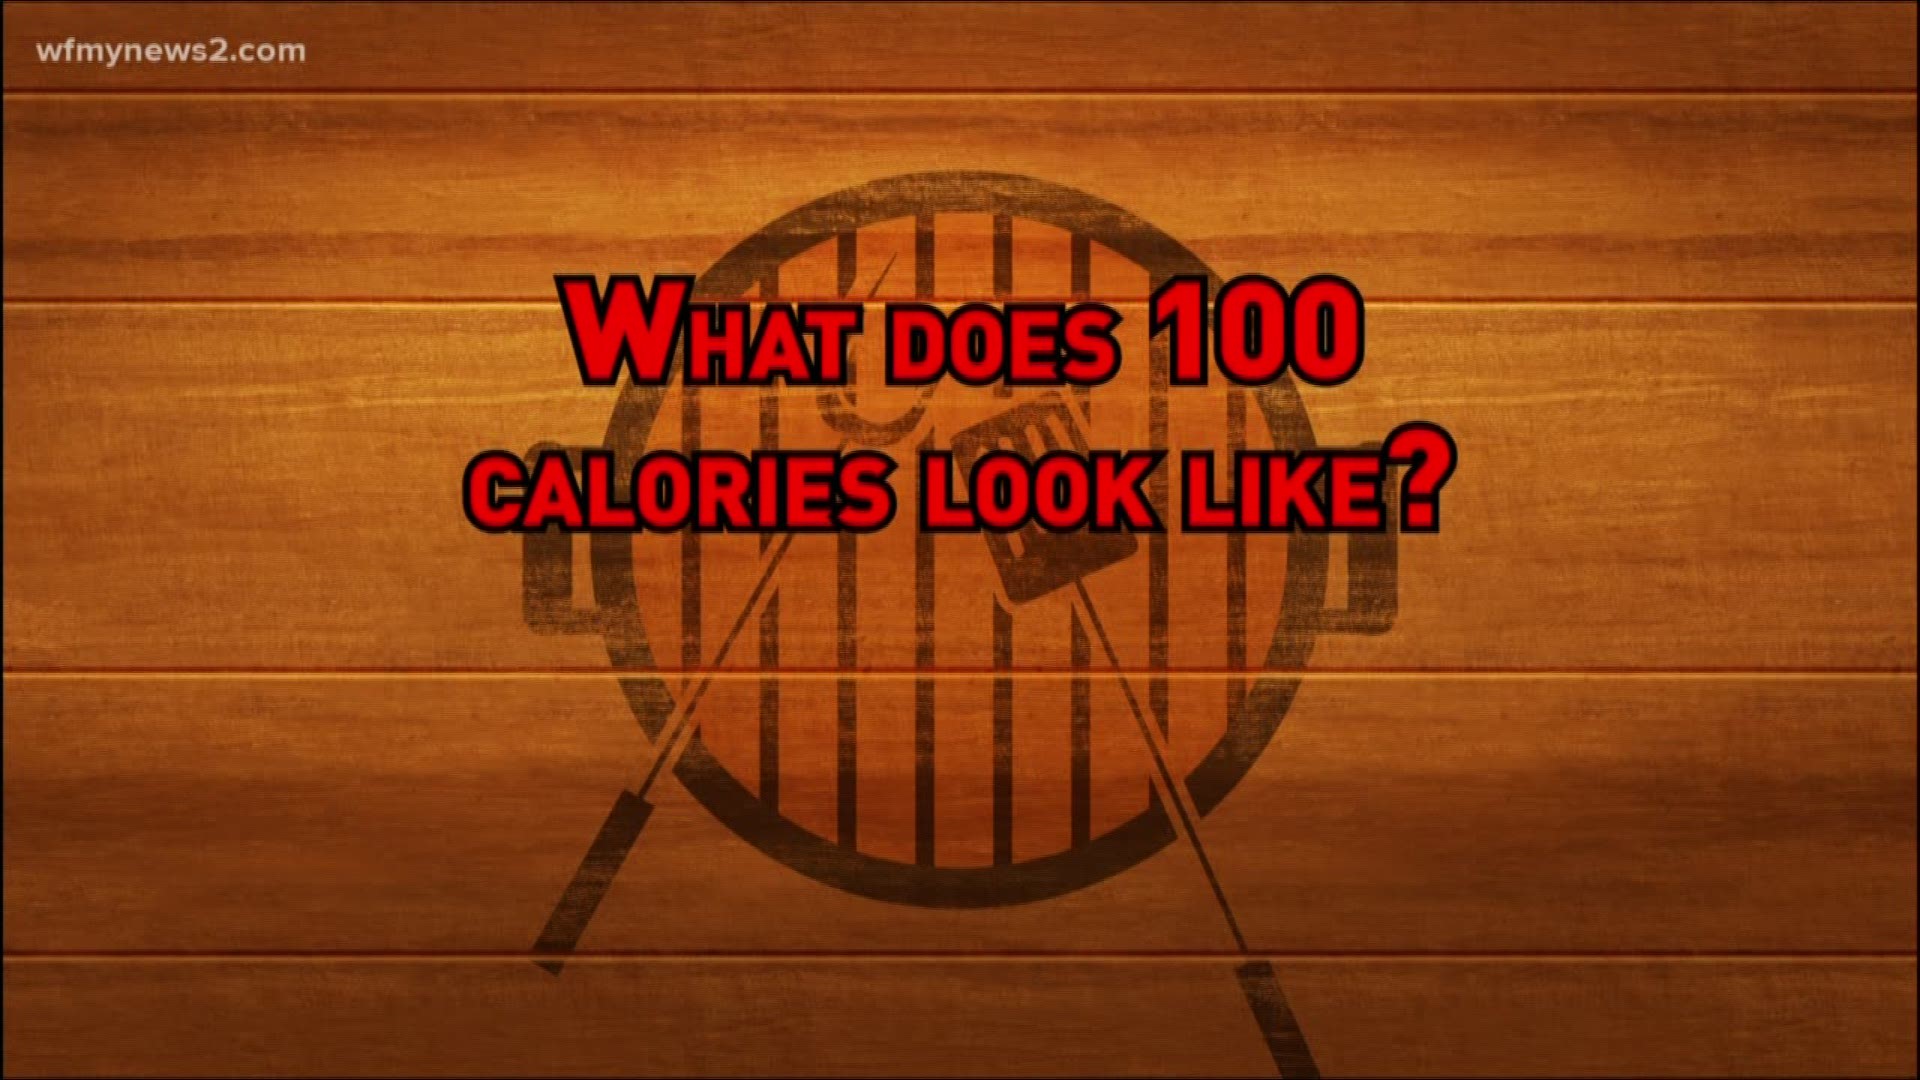 What Does 100 Calories Look Like At Your Backyard Picnic or BBQ? We put our folks to the test, see what you would say.